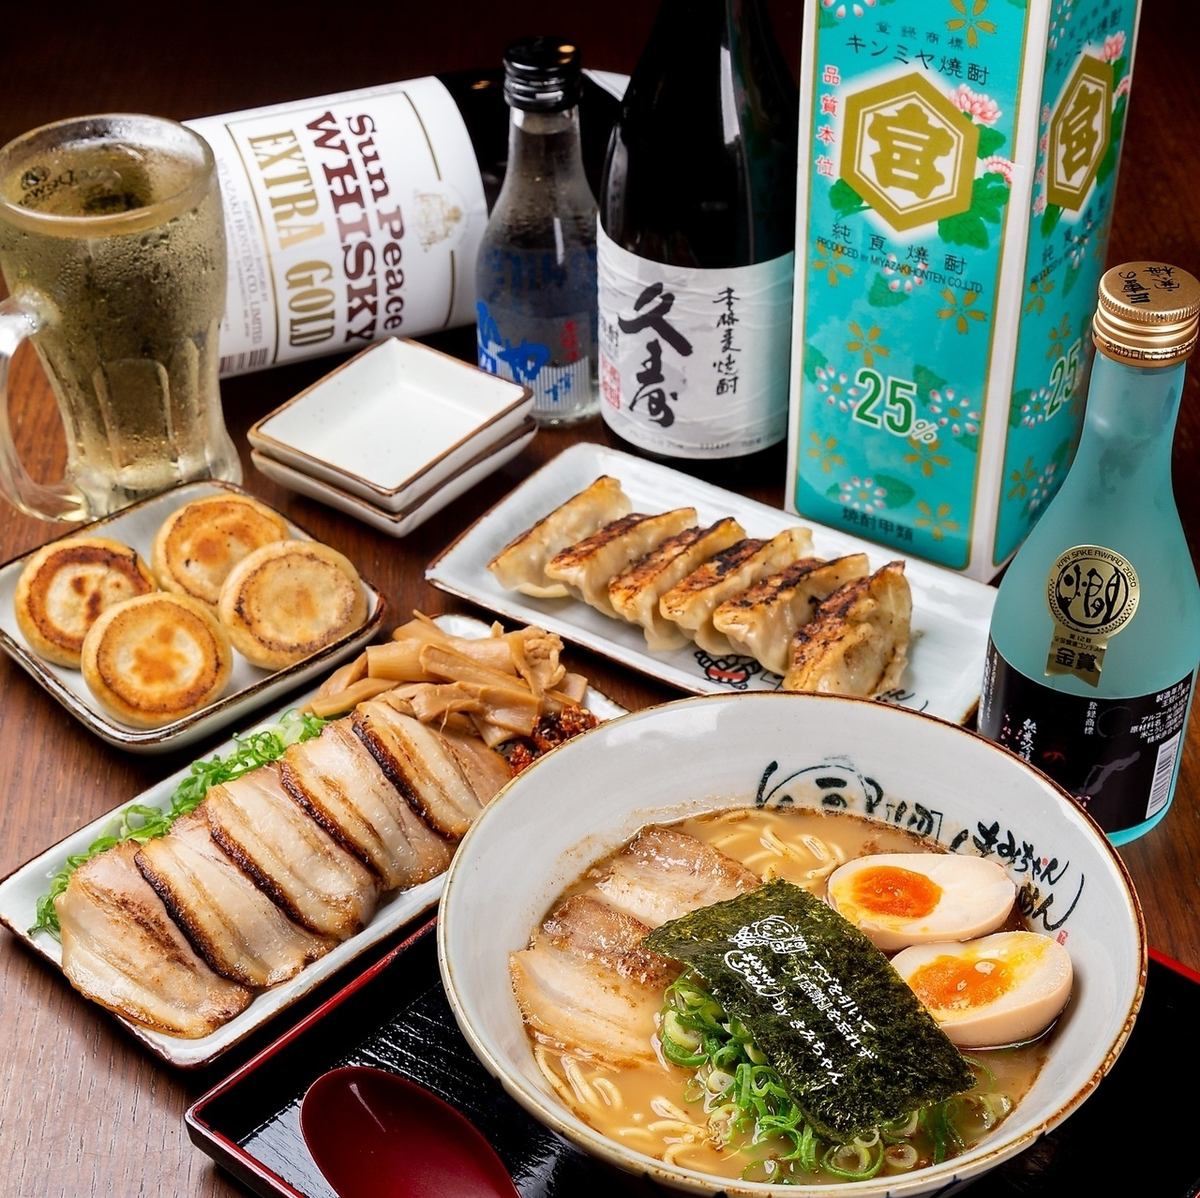 In addition to ramen, we also have courses.